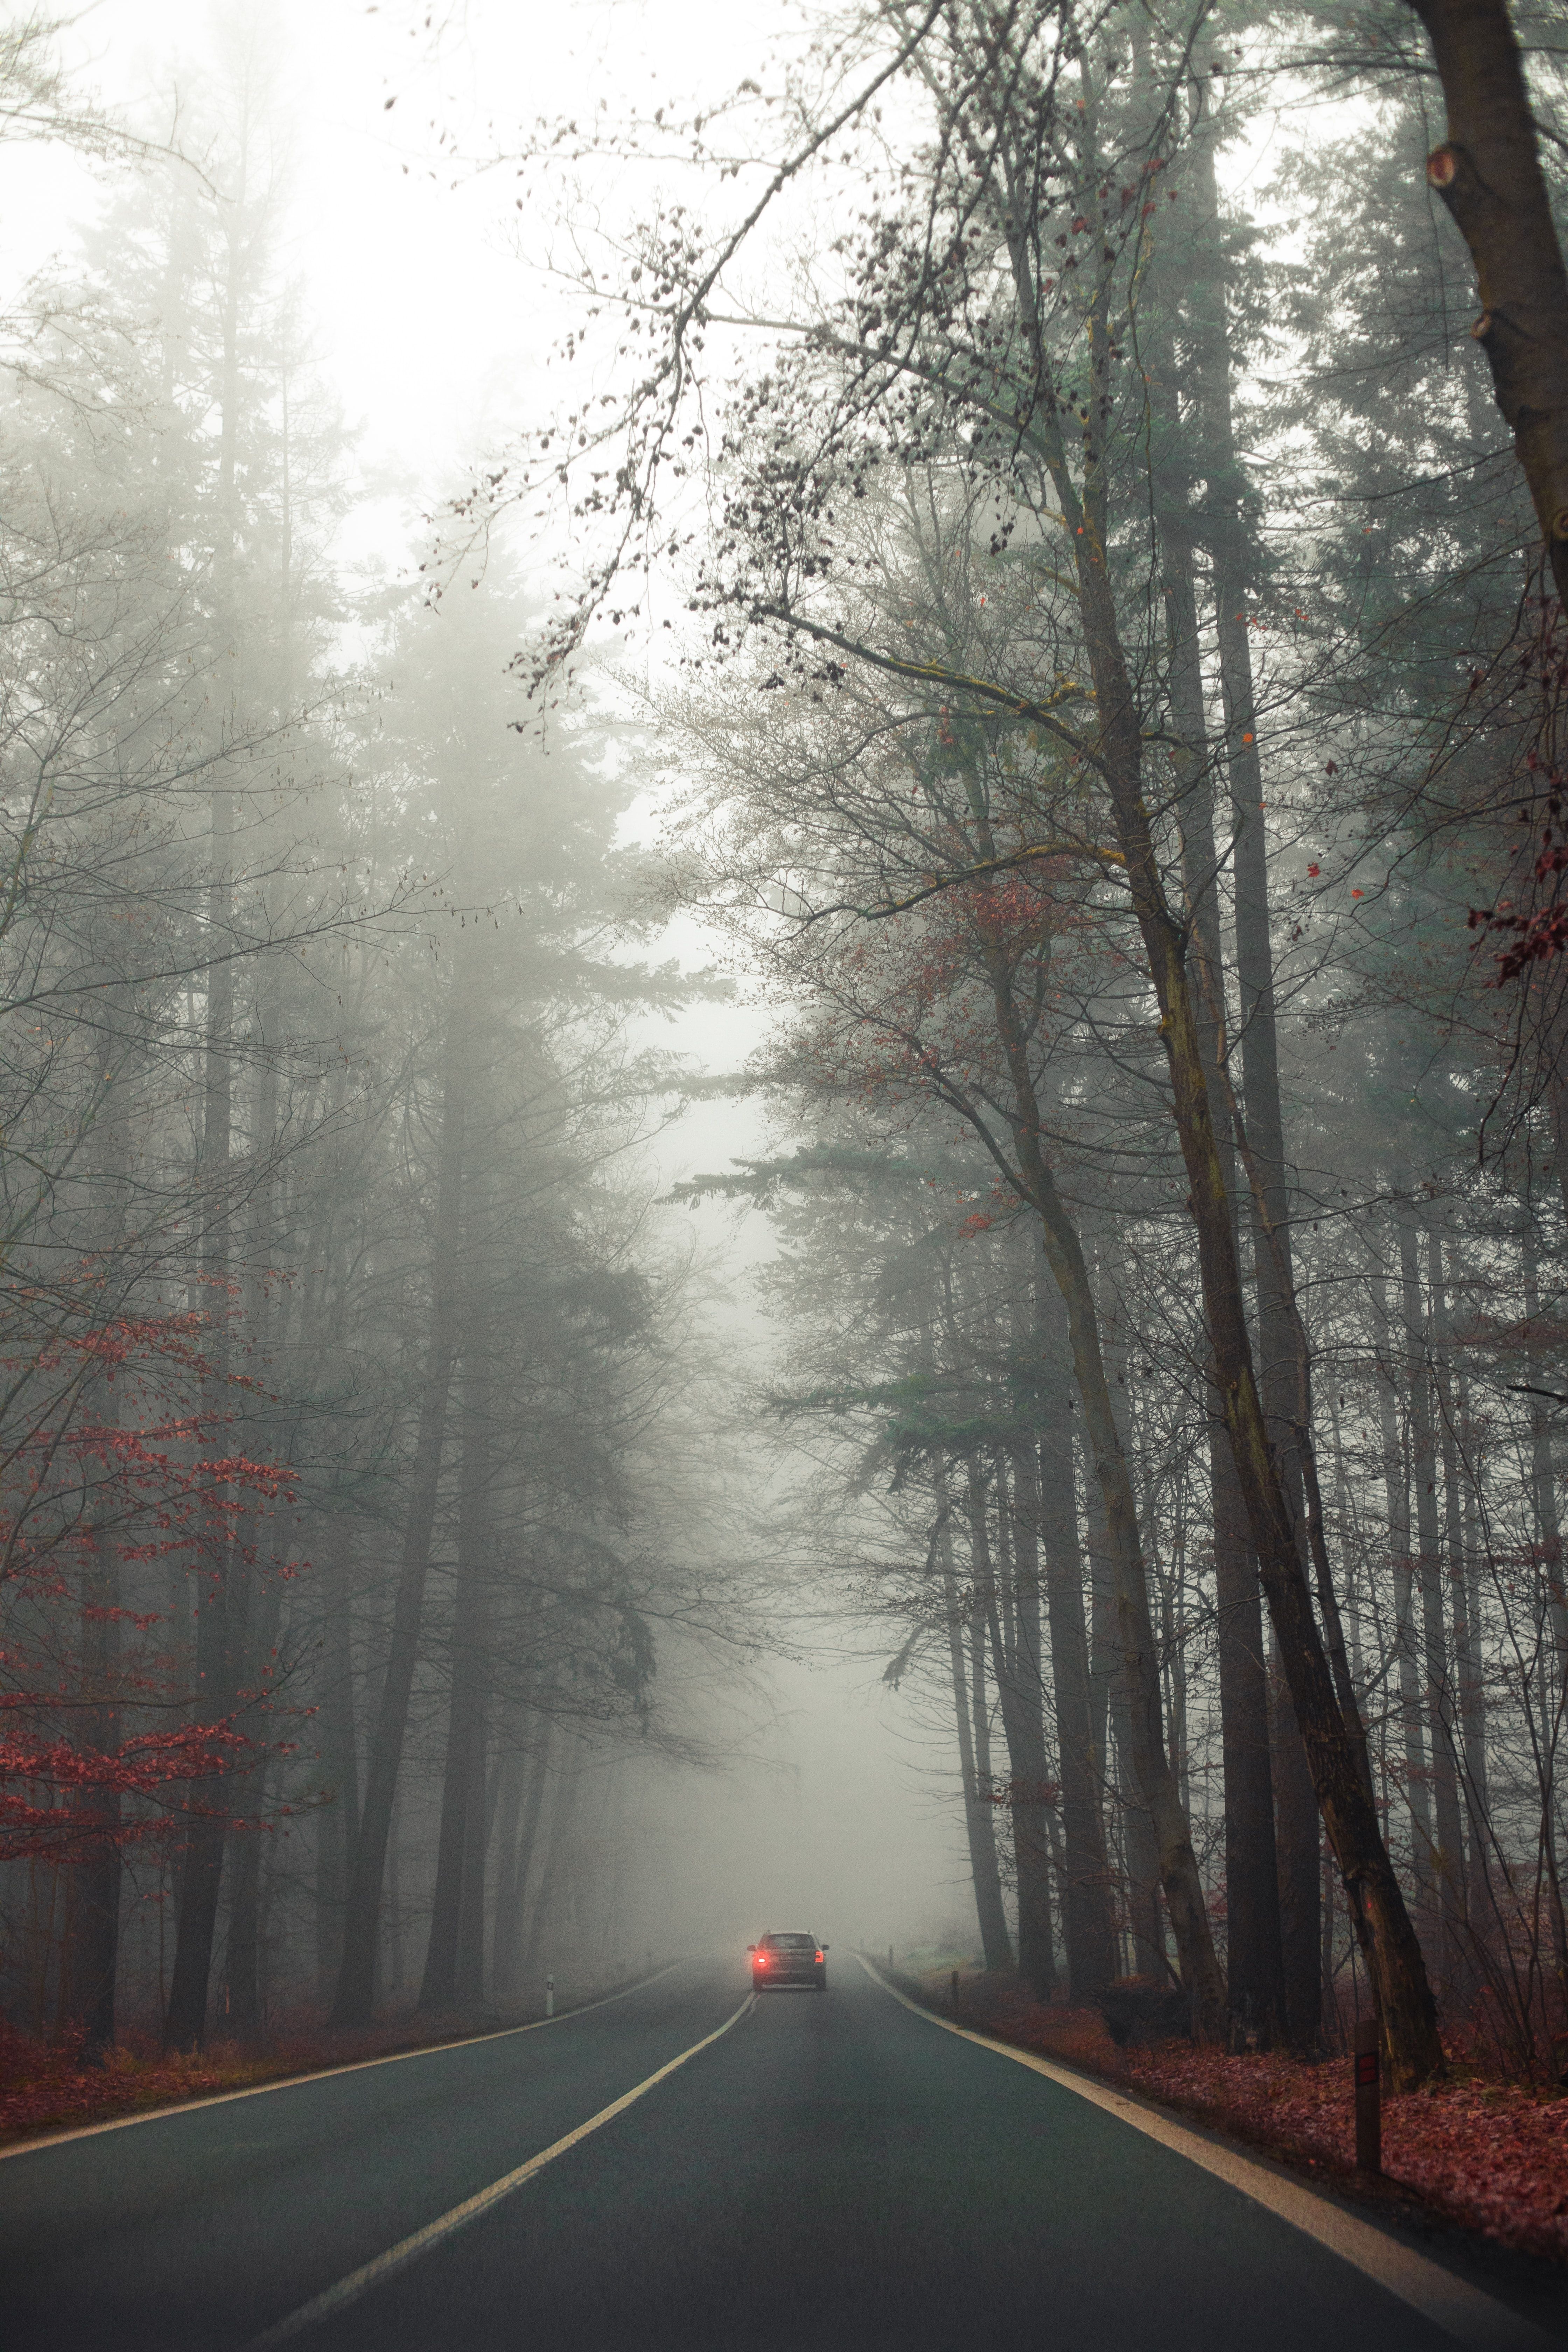 A car is driving down a foggy road surrounded by trees. - Fog, foggy forest